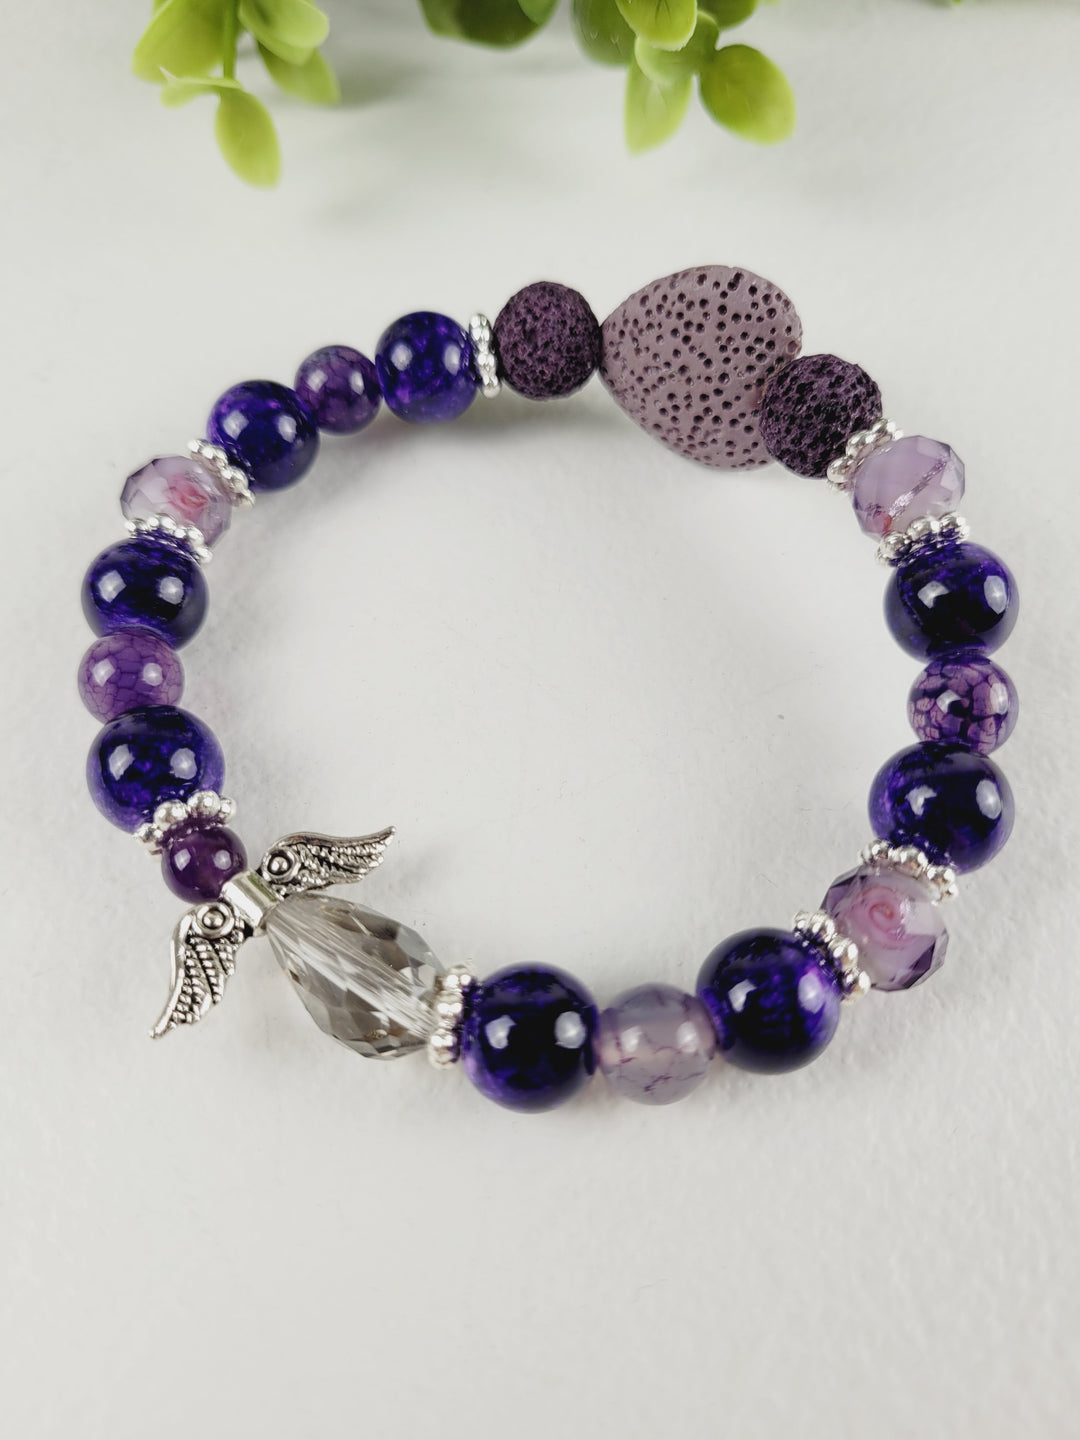 Designed By Me -  Angel Jewelry, Bracelets with Essential Oil Beads